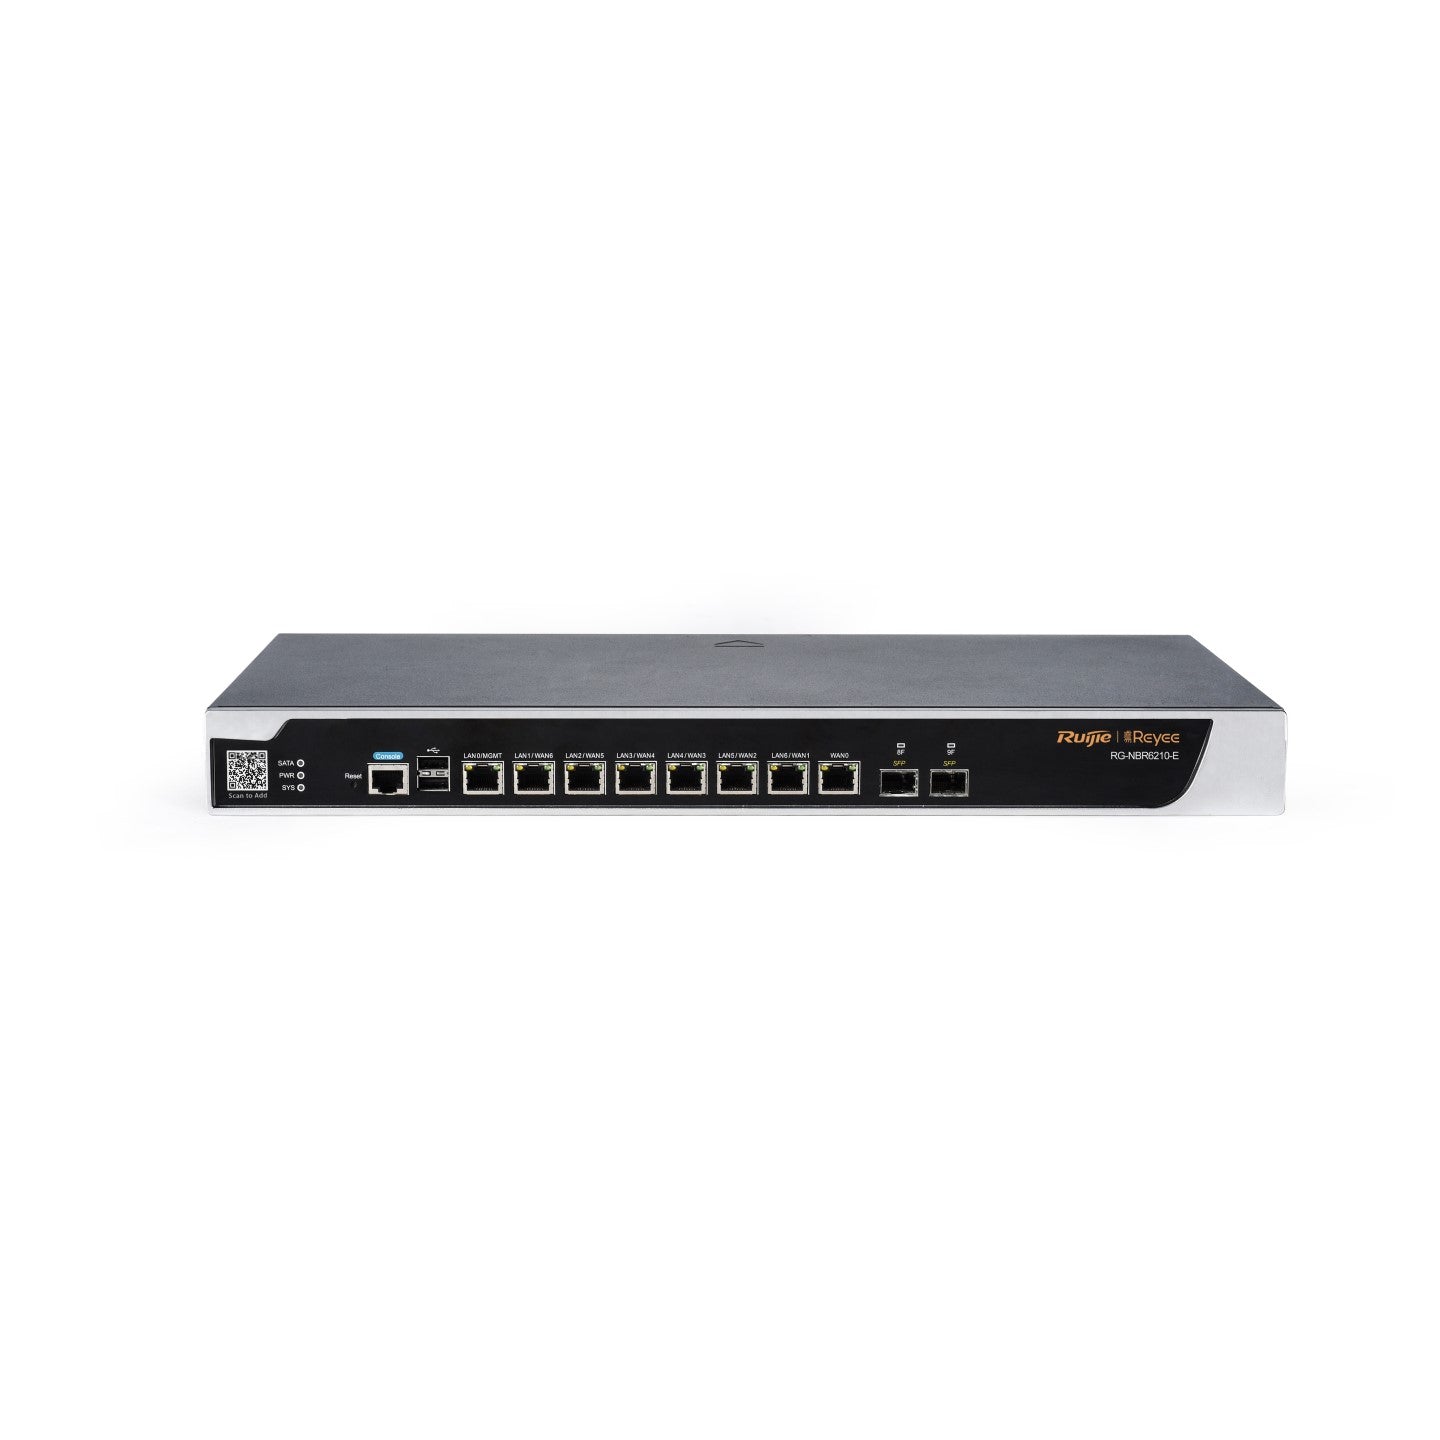 Reyee RG-NBR6210-E High-performance Cloud Managed Security Router